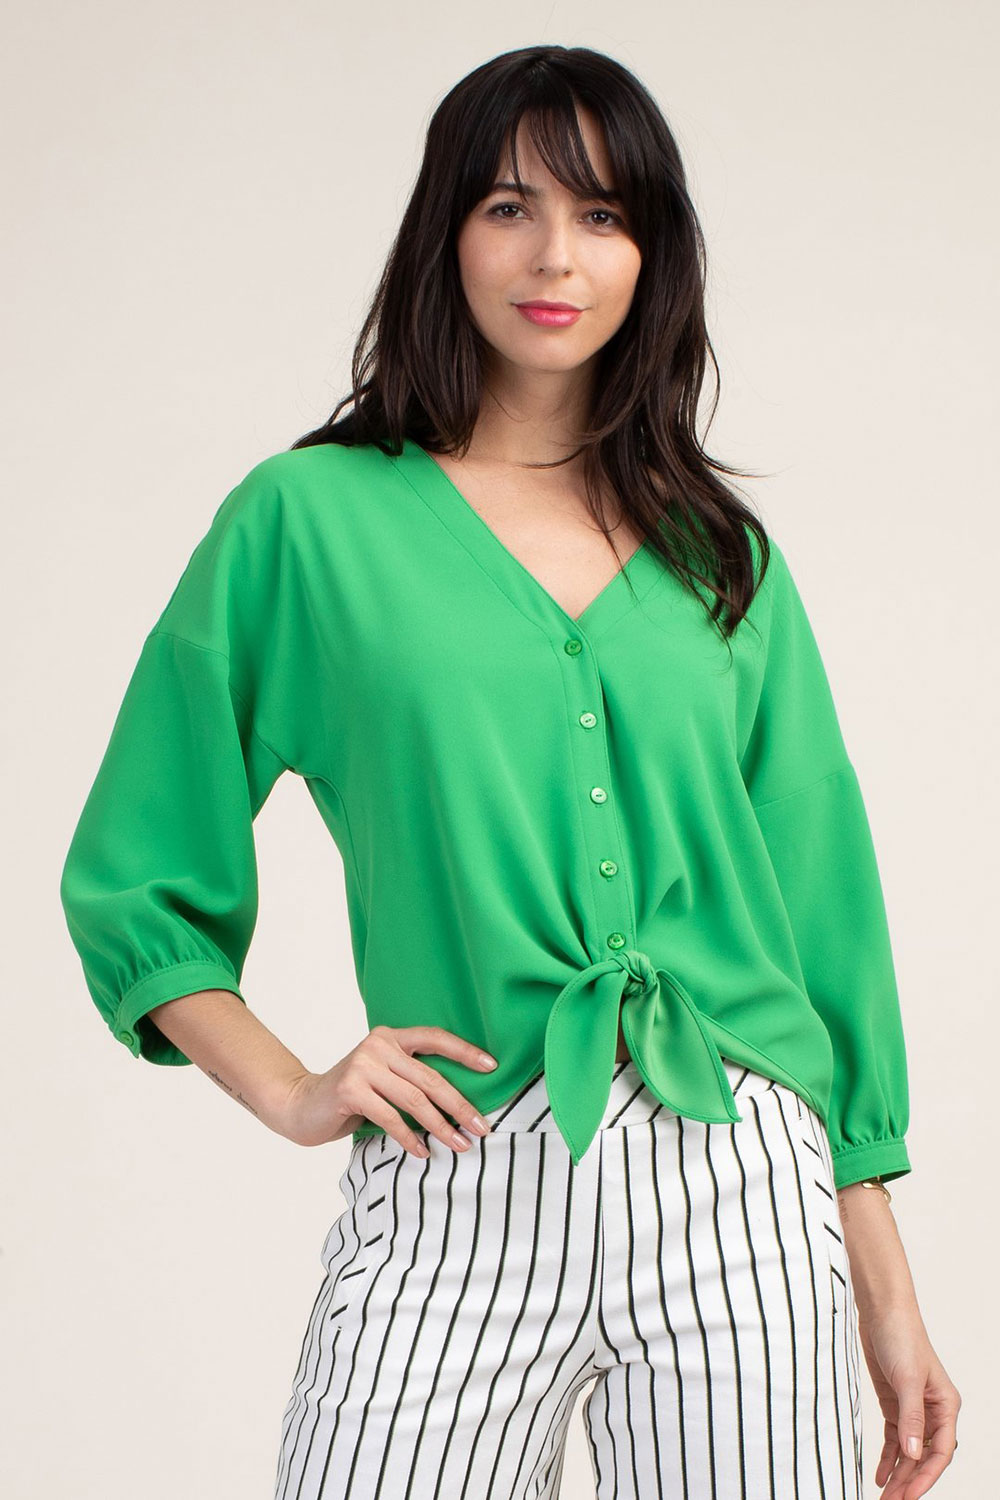 Cute Green Top for summer from Trina Turk